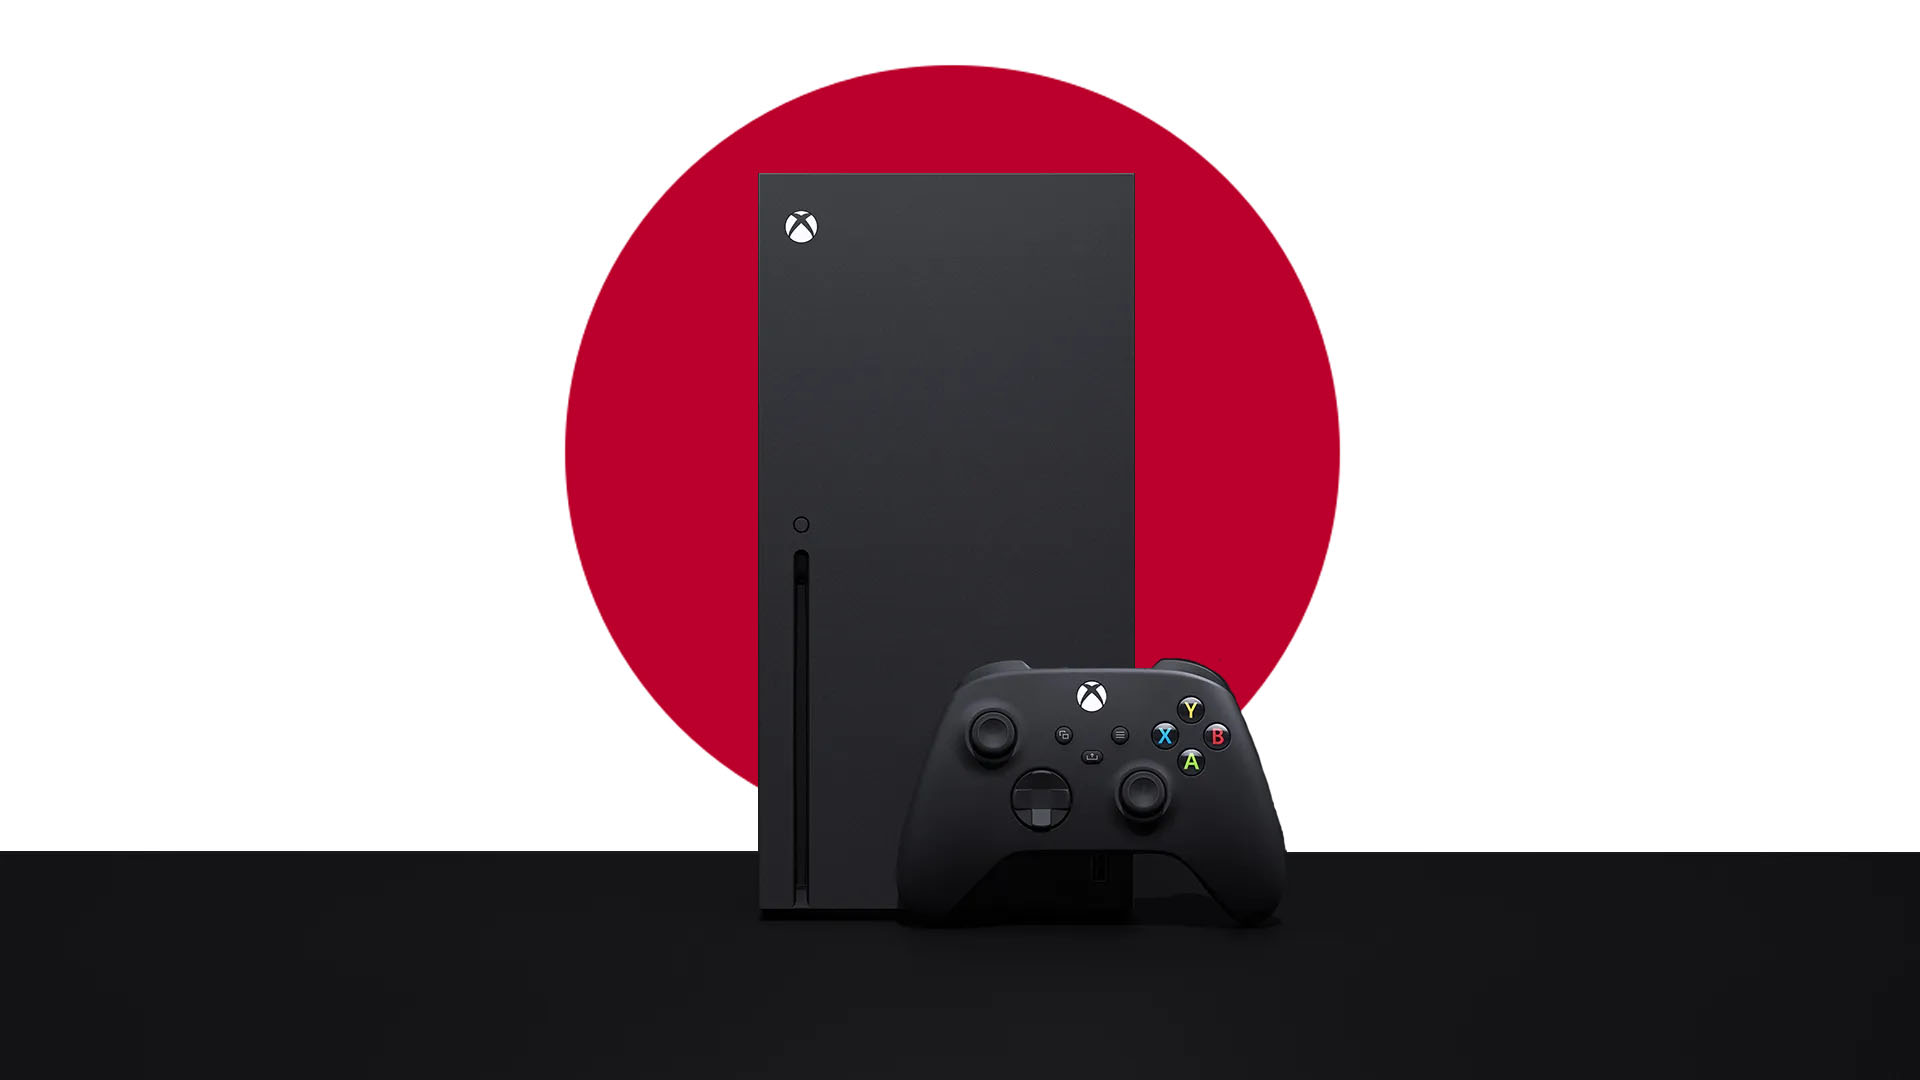 Xbox Series X|S sold more than double the Xbox One in Japan 